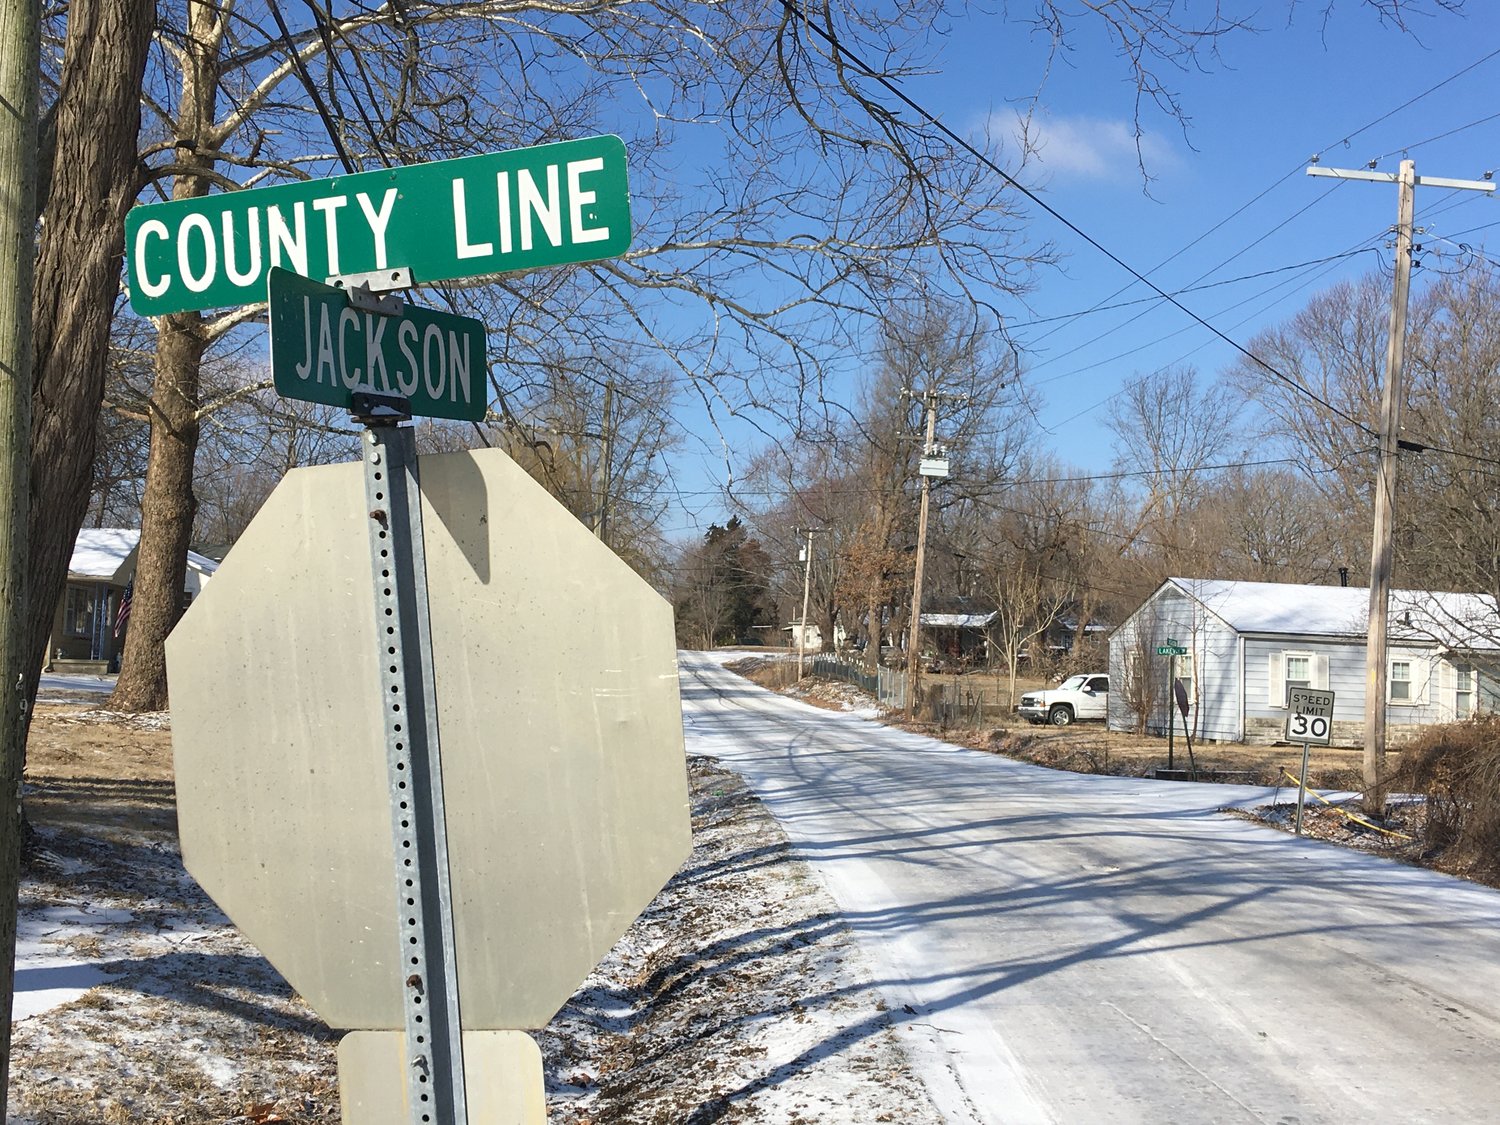 James R. Fannon was killed just after midnight Thursday along County Line Road in Windsor. Benton, Henry, and Pettis counties’ sheriff’s departments all responded due to the body being found near all three counties’ lines.